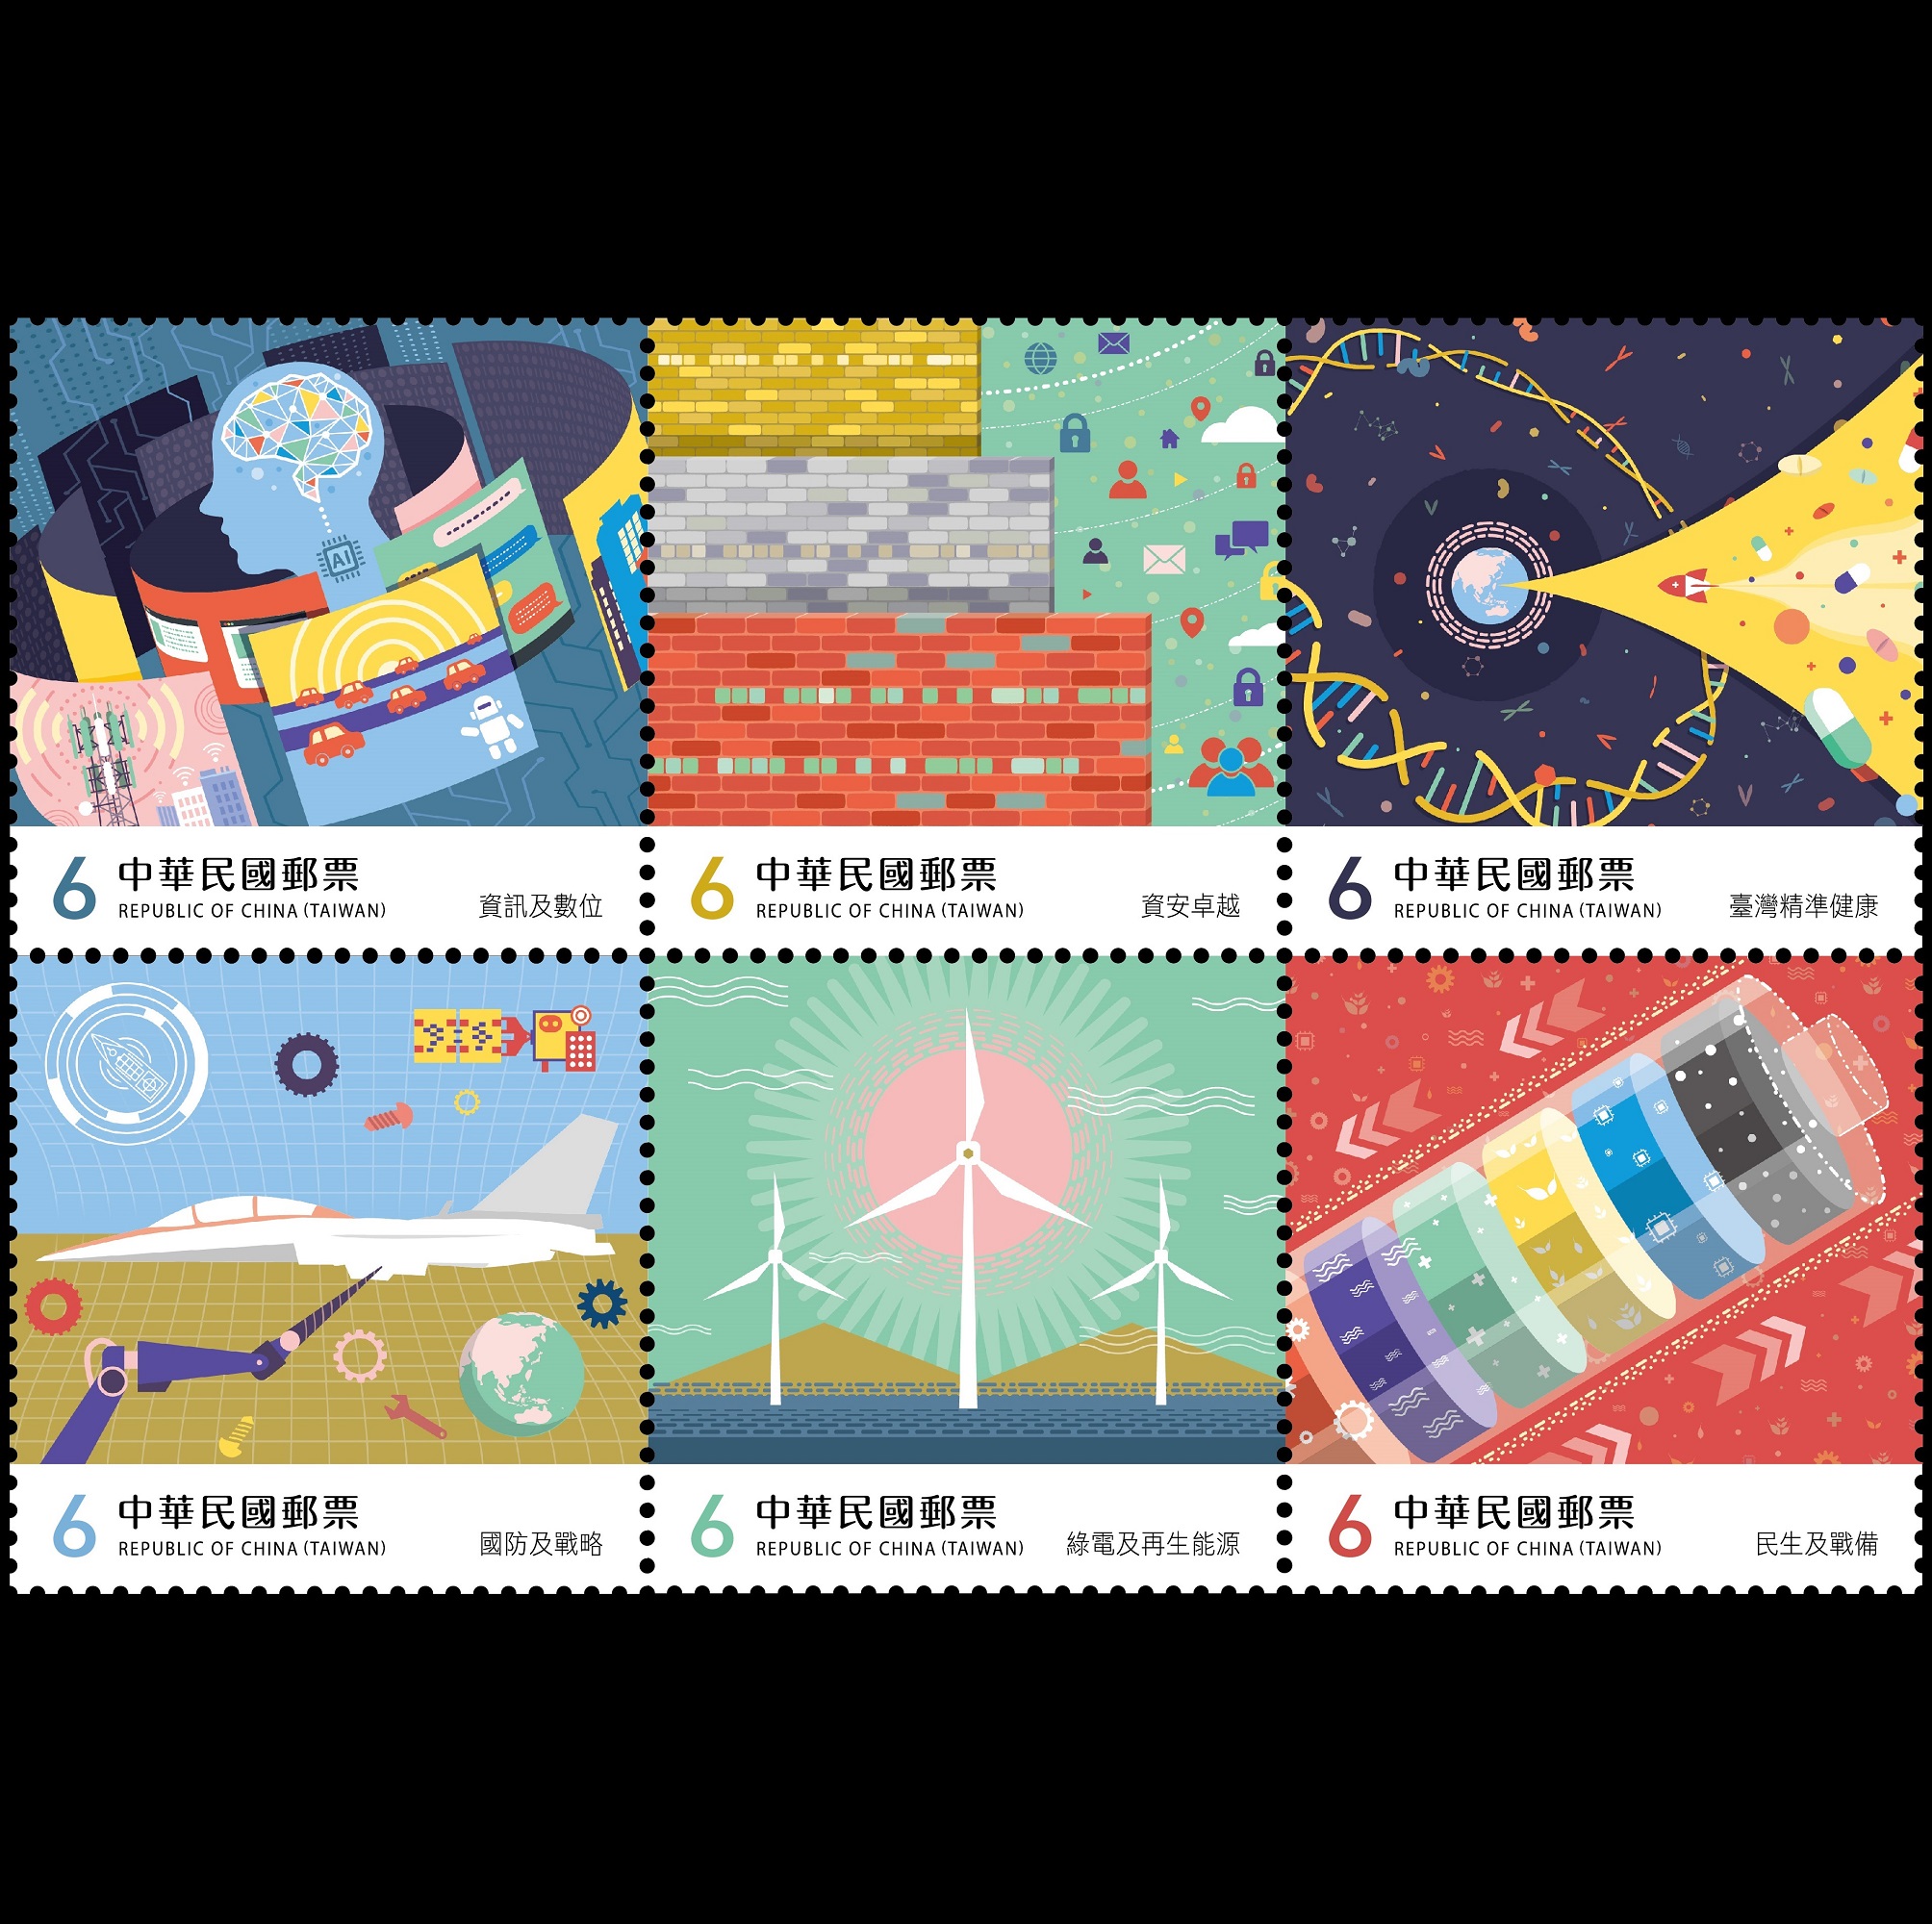 Core Industries of Taiwan Postage Stamps